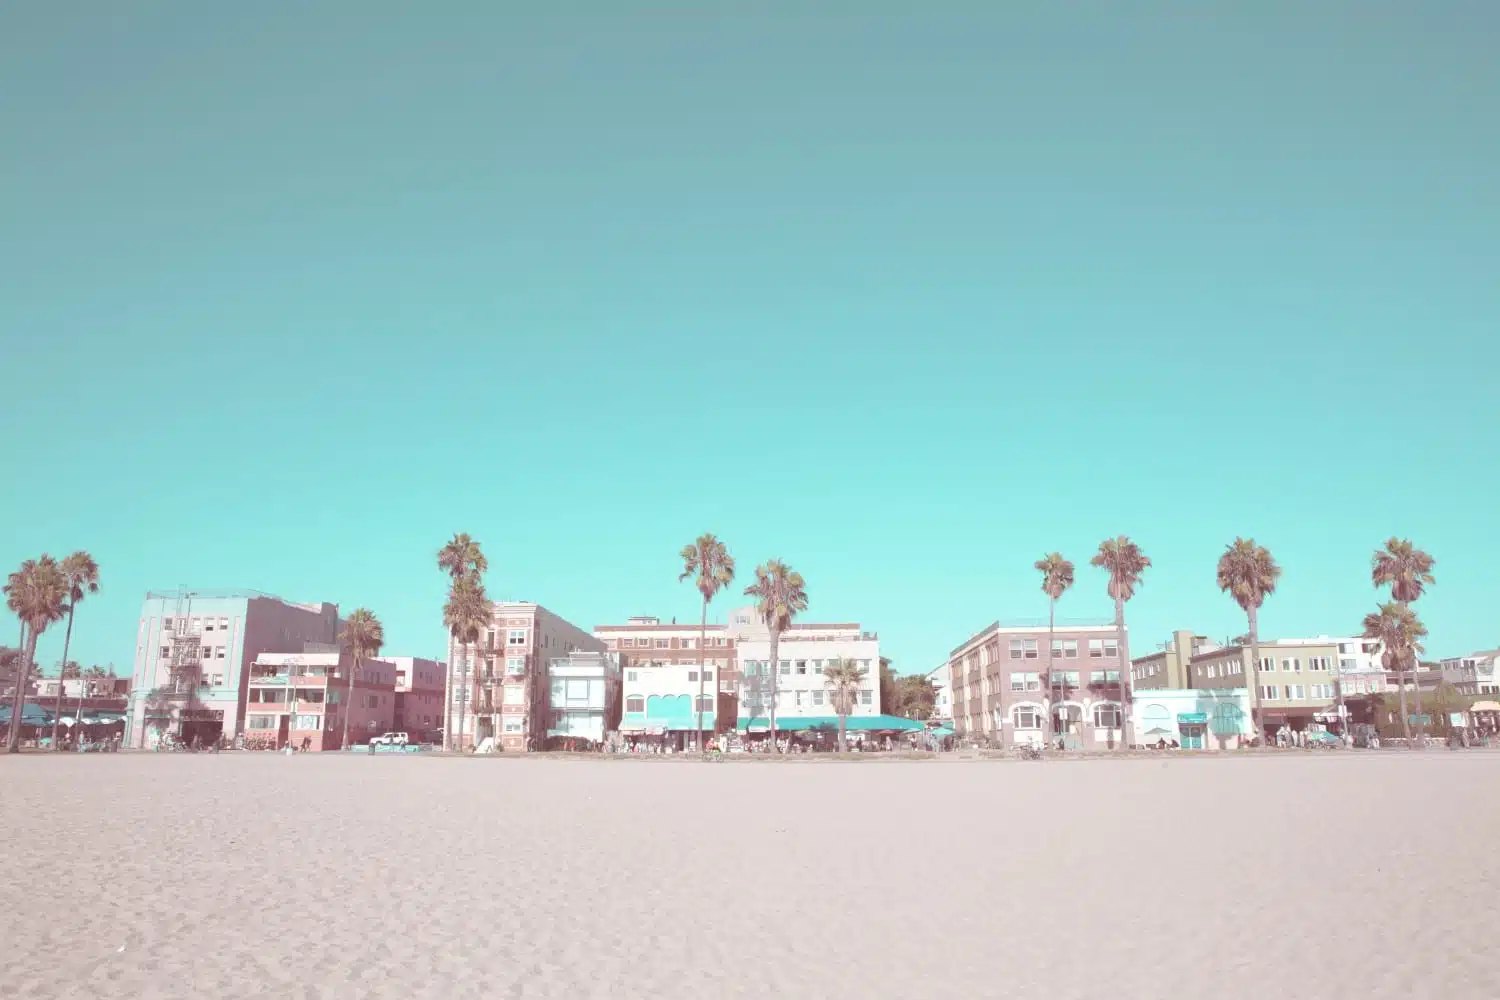 Venice Beach - One of the Cool Places in Los Angeles